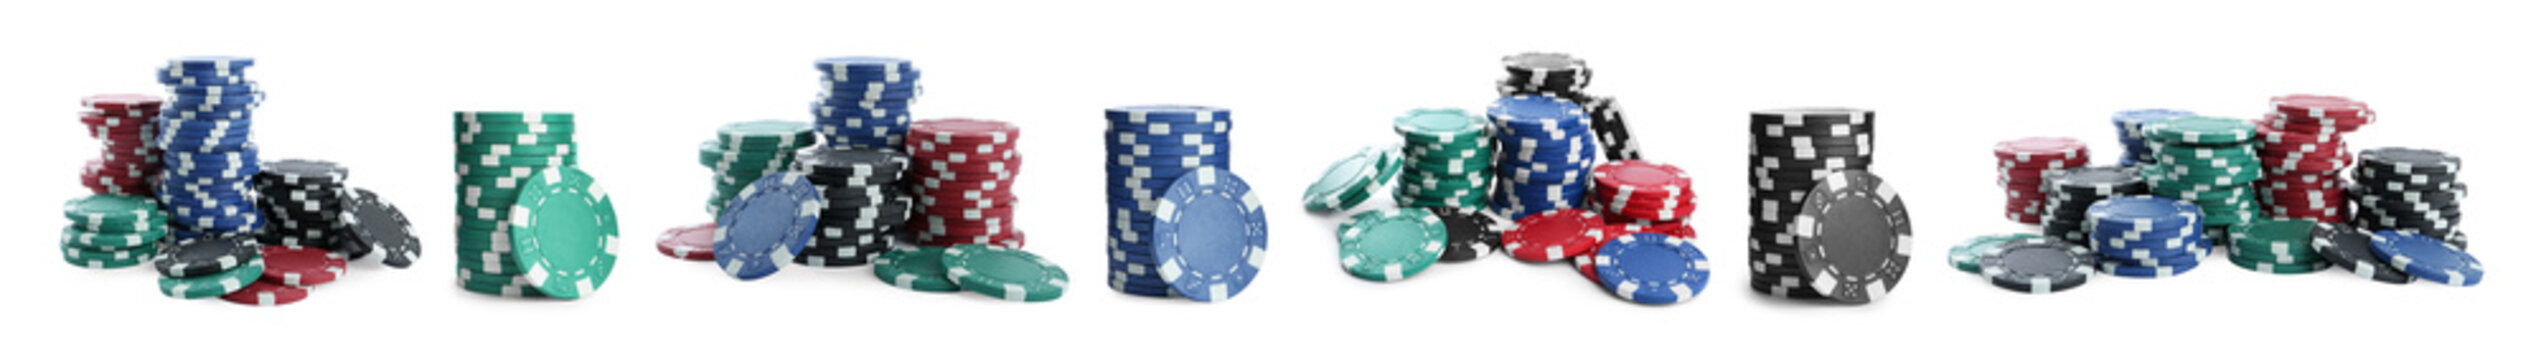 Set with stacks of different casino chips on white background, banner design. Poker game